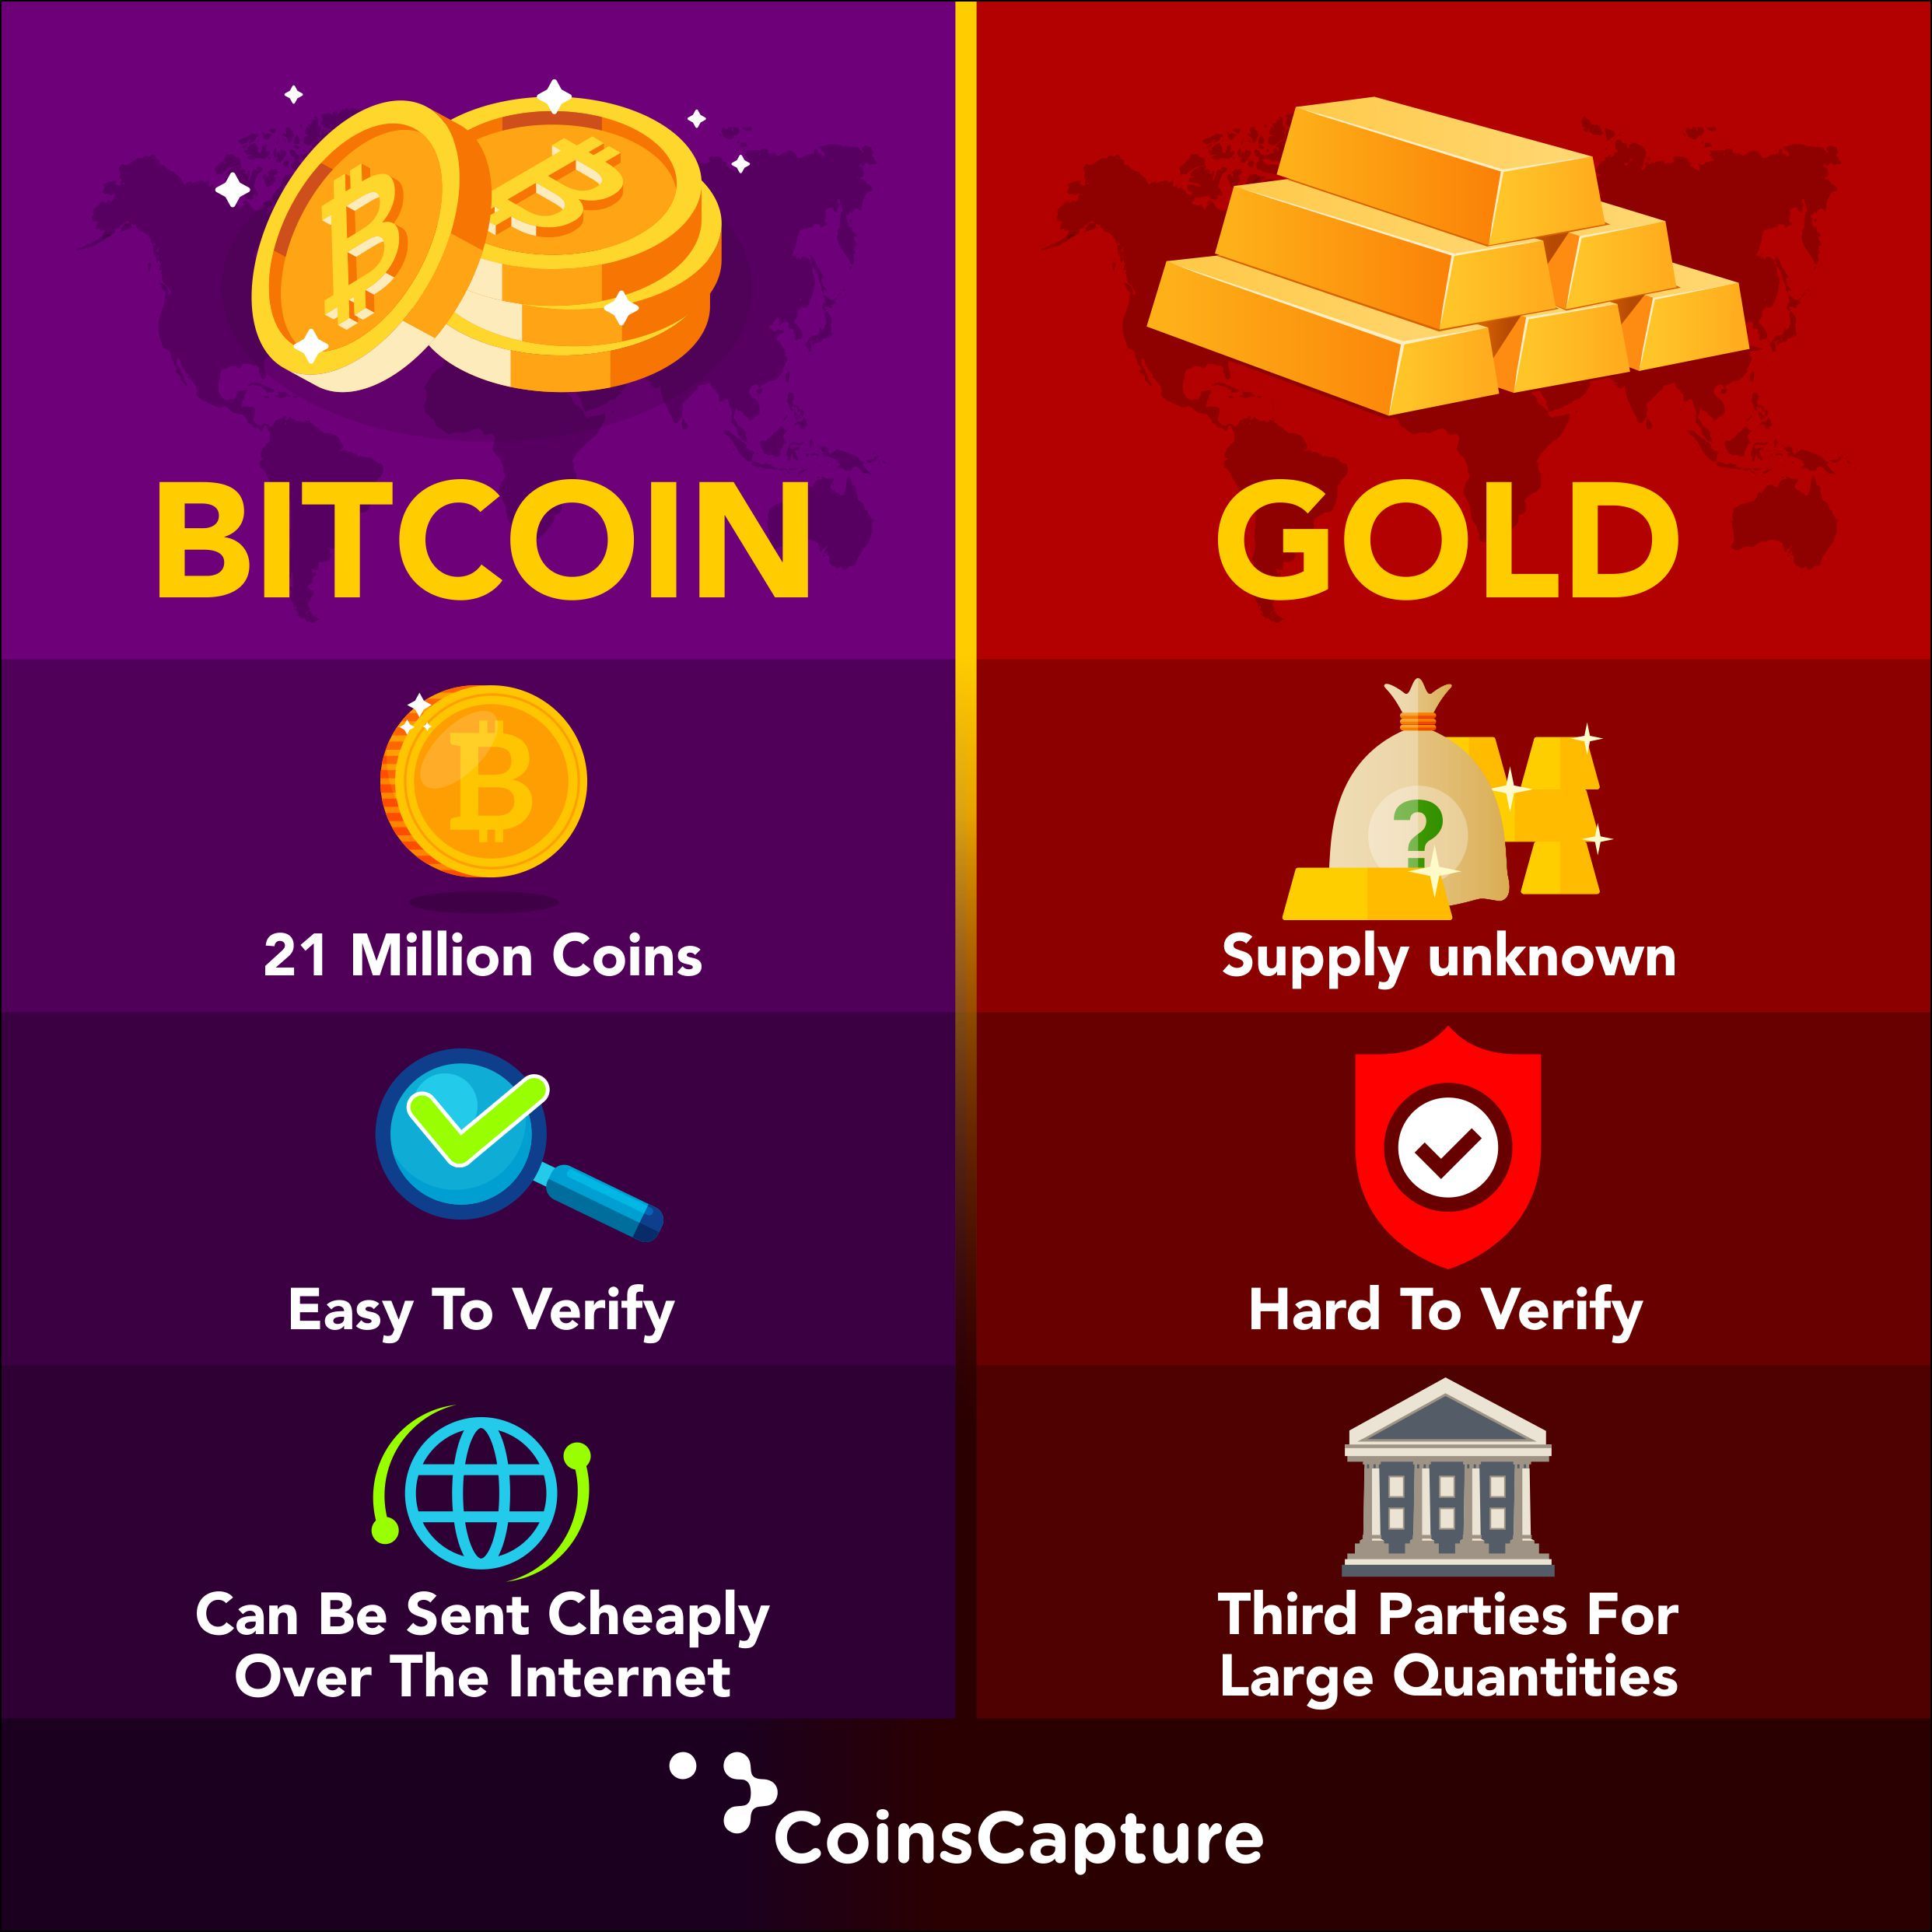 Bitcoin Vs Gold And Stocks: Comparing Bitcoin To Traditional Assets